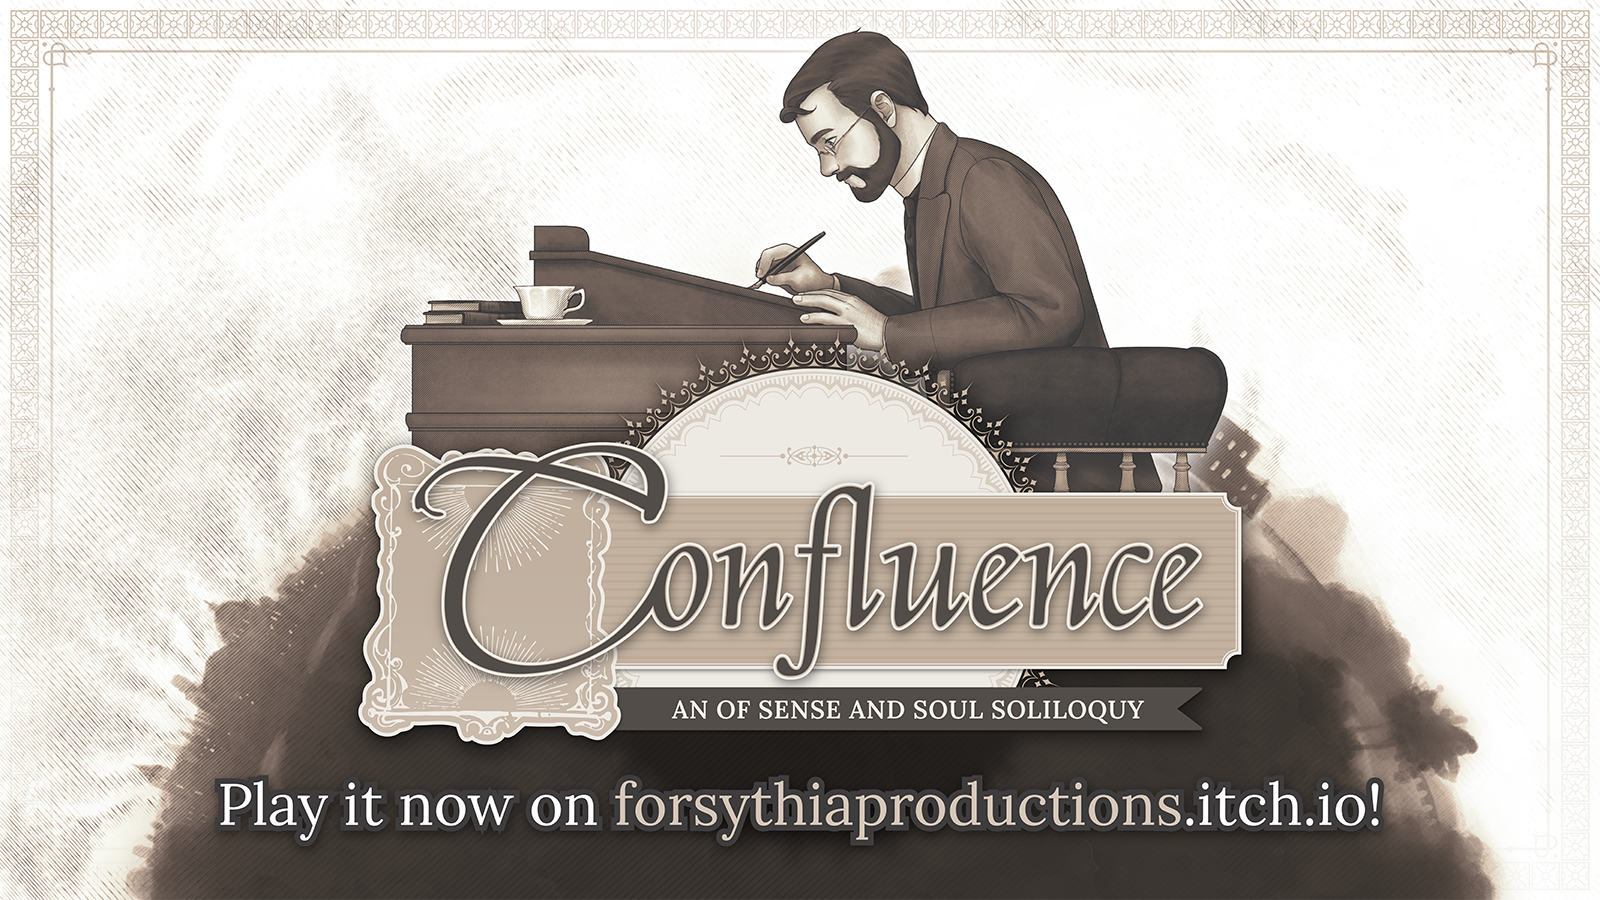 Confluence: An Of Sense and Soul Soliloquy. Play it now at forsythiaproductions.itch.io!